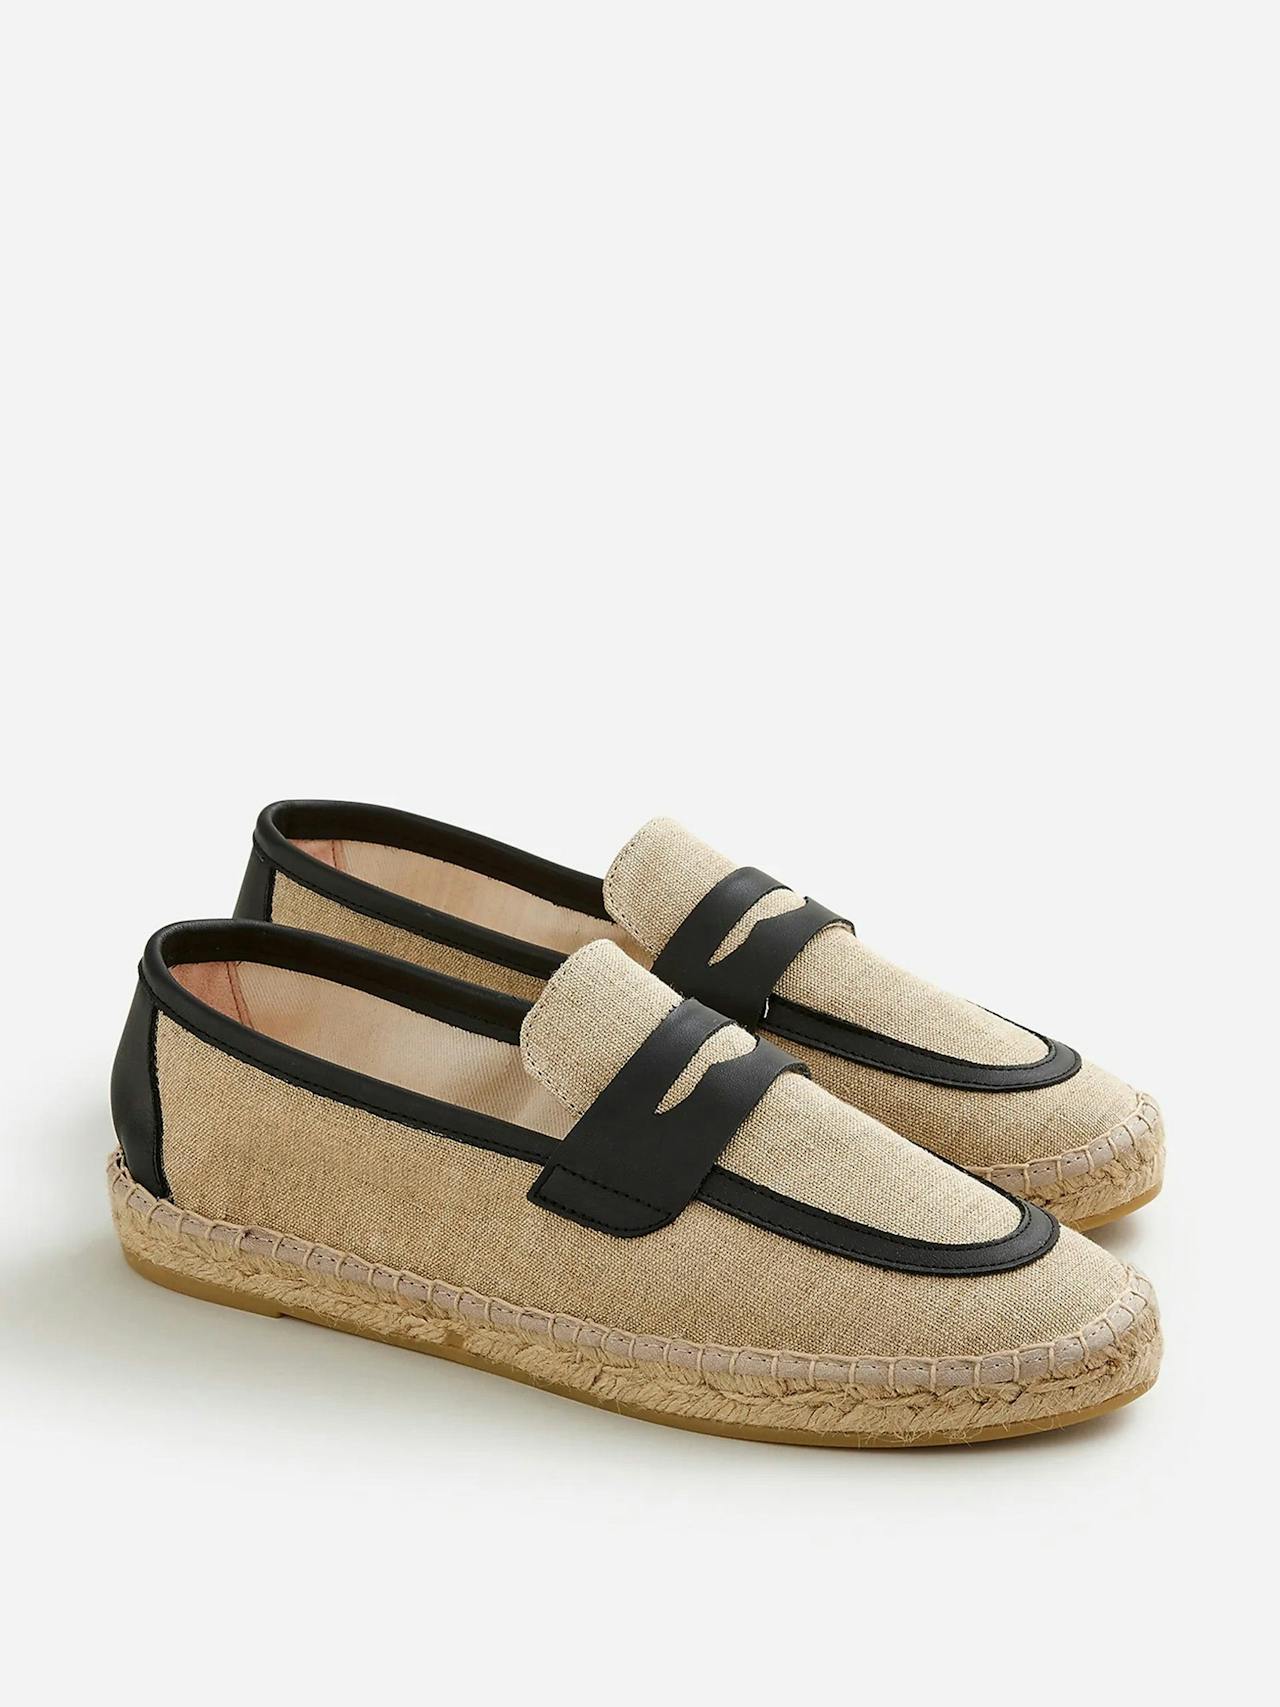 Made-in-Spain loafer espadrilles in linen blend and leather